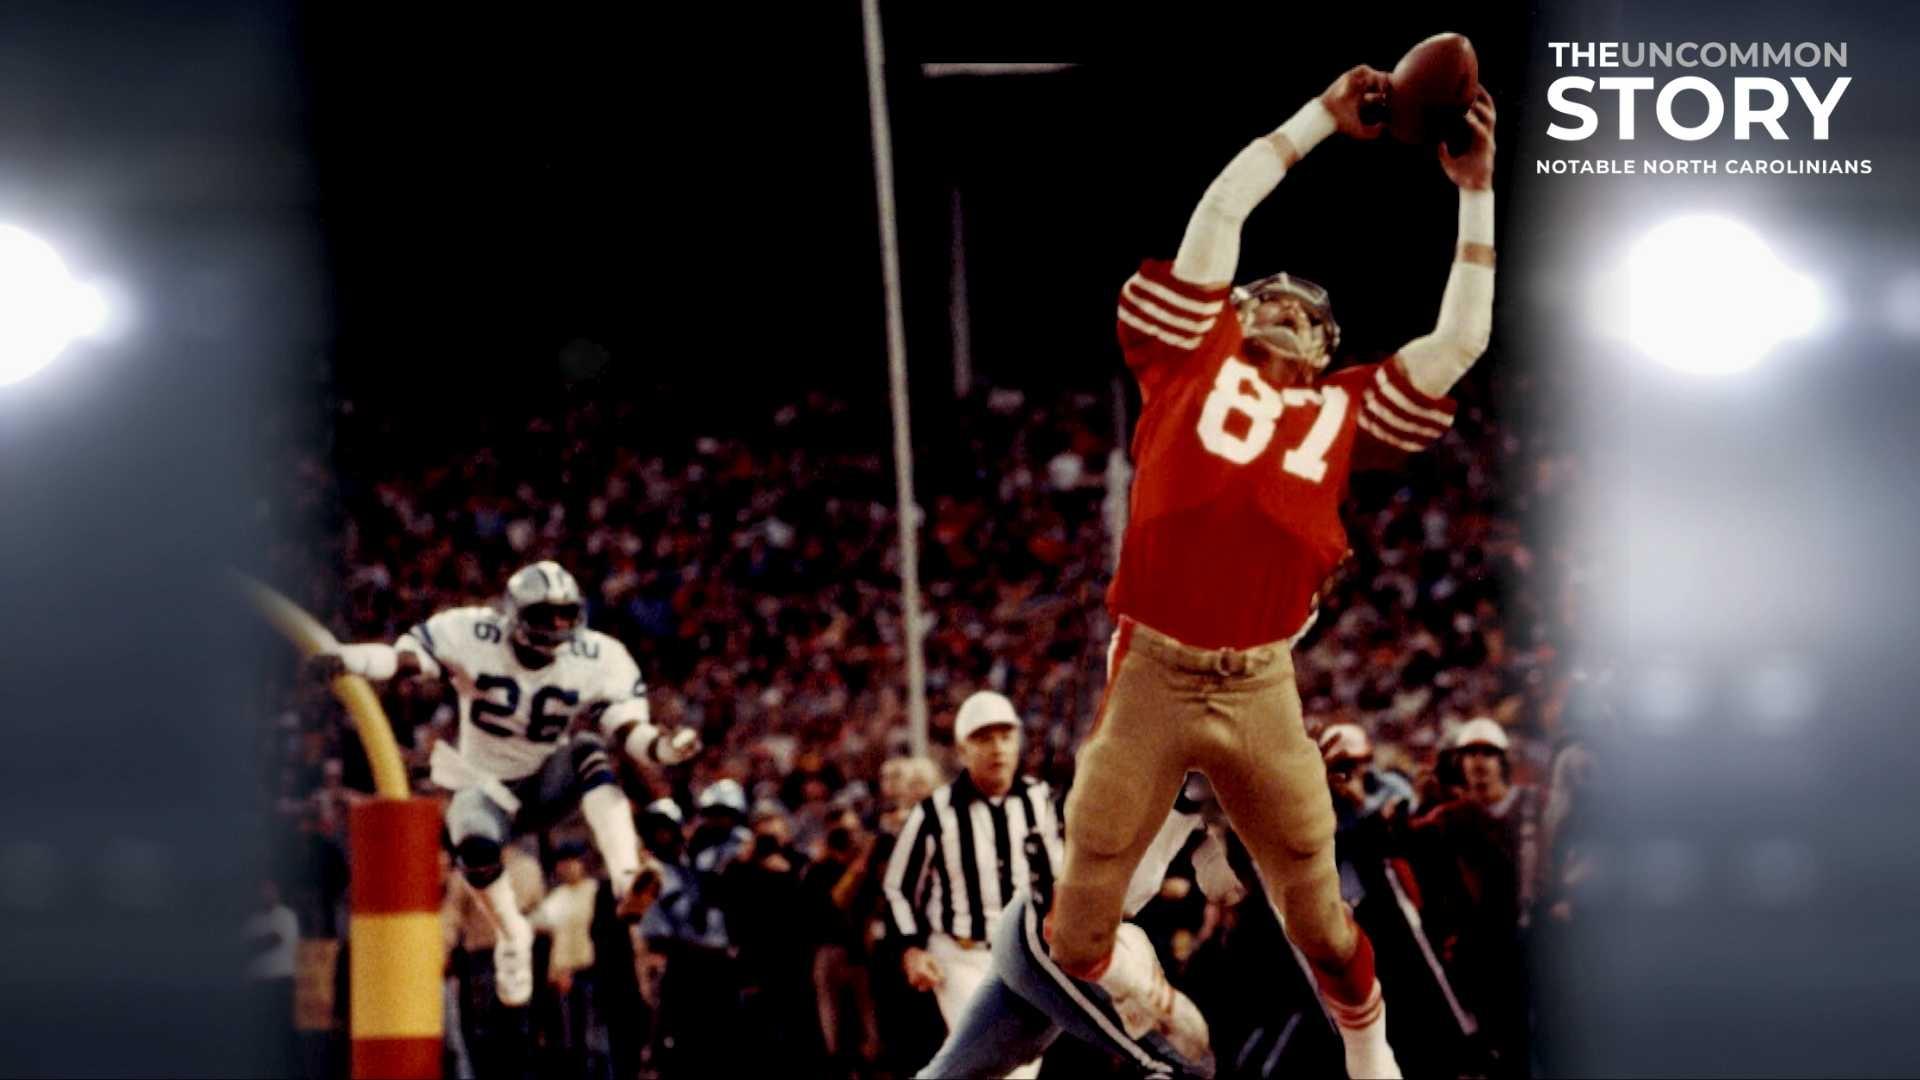 The Uncommon Story: Notable North Carolinians, Dwight Clark